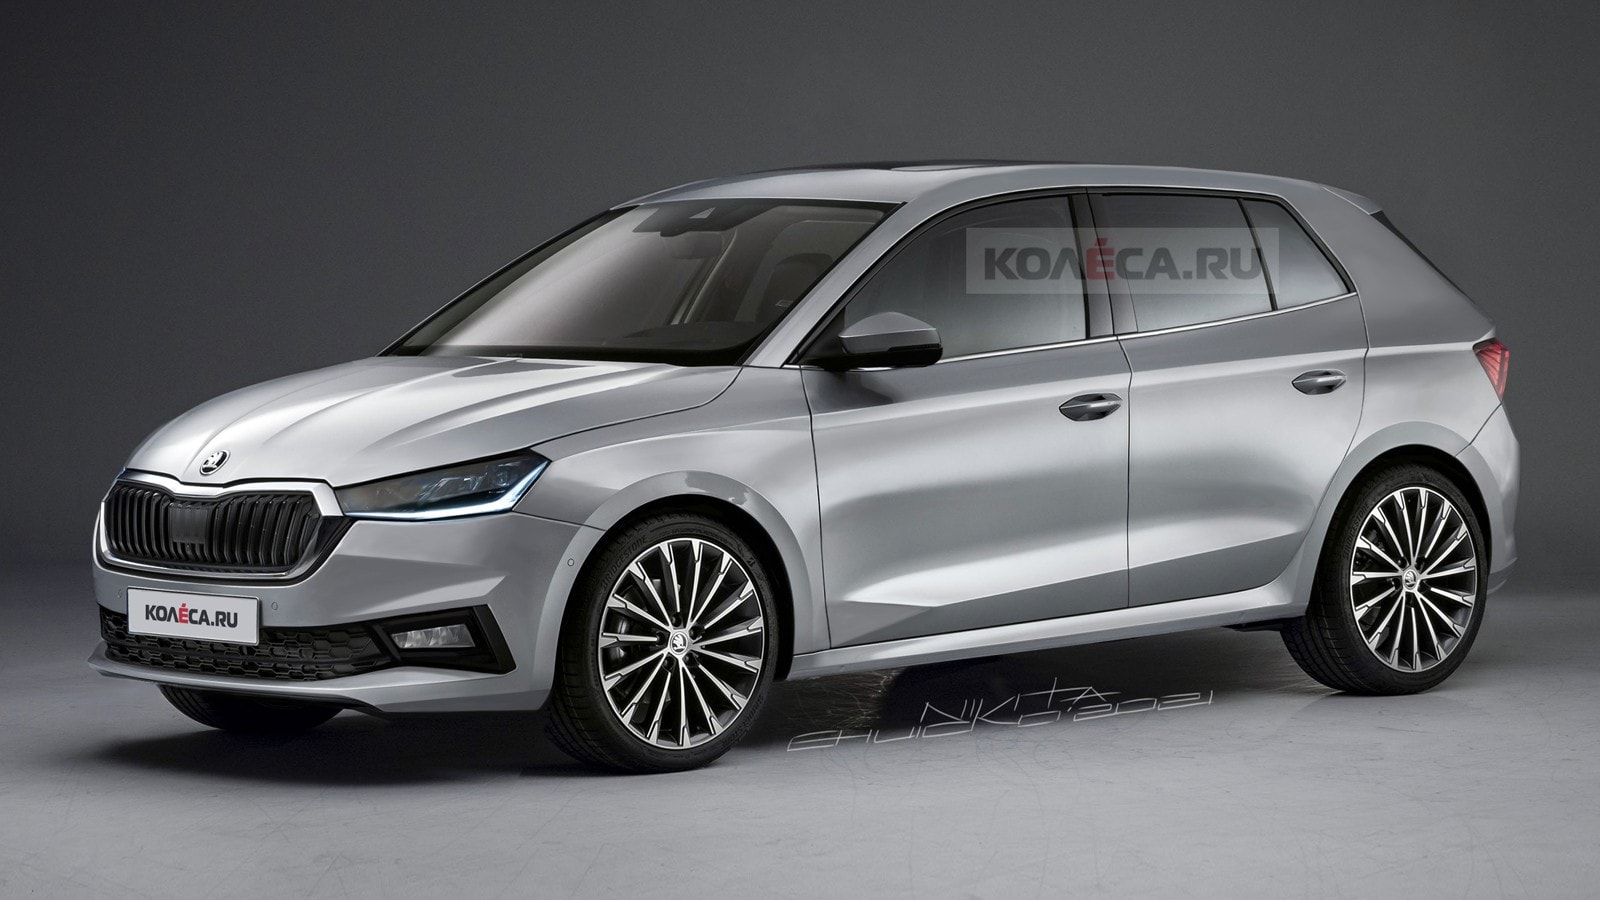 https://s1.cdn.autoevolution.com/images/news/2022-skoda-fabia-gets-realistically-rendered-ahead-of-debut-but-will-it-sell-160003_1.jpg